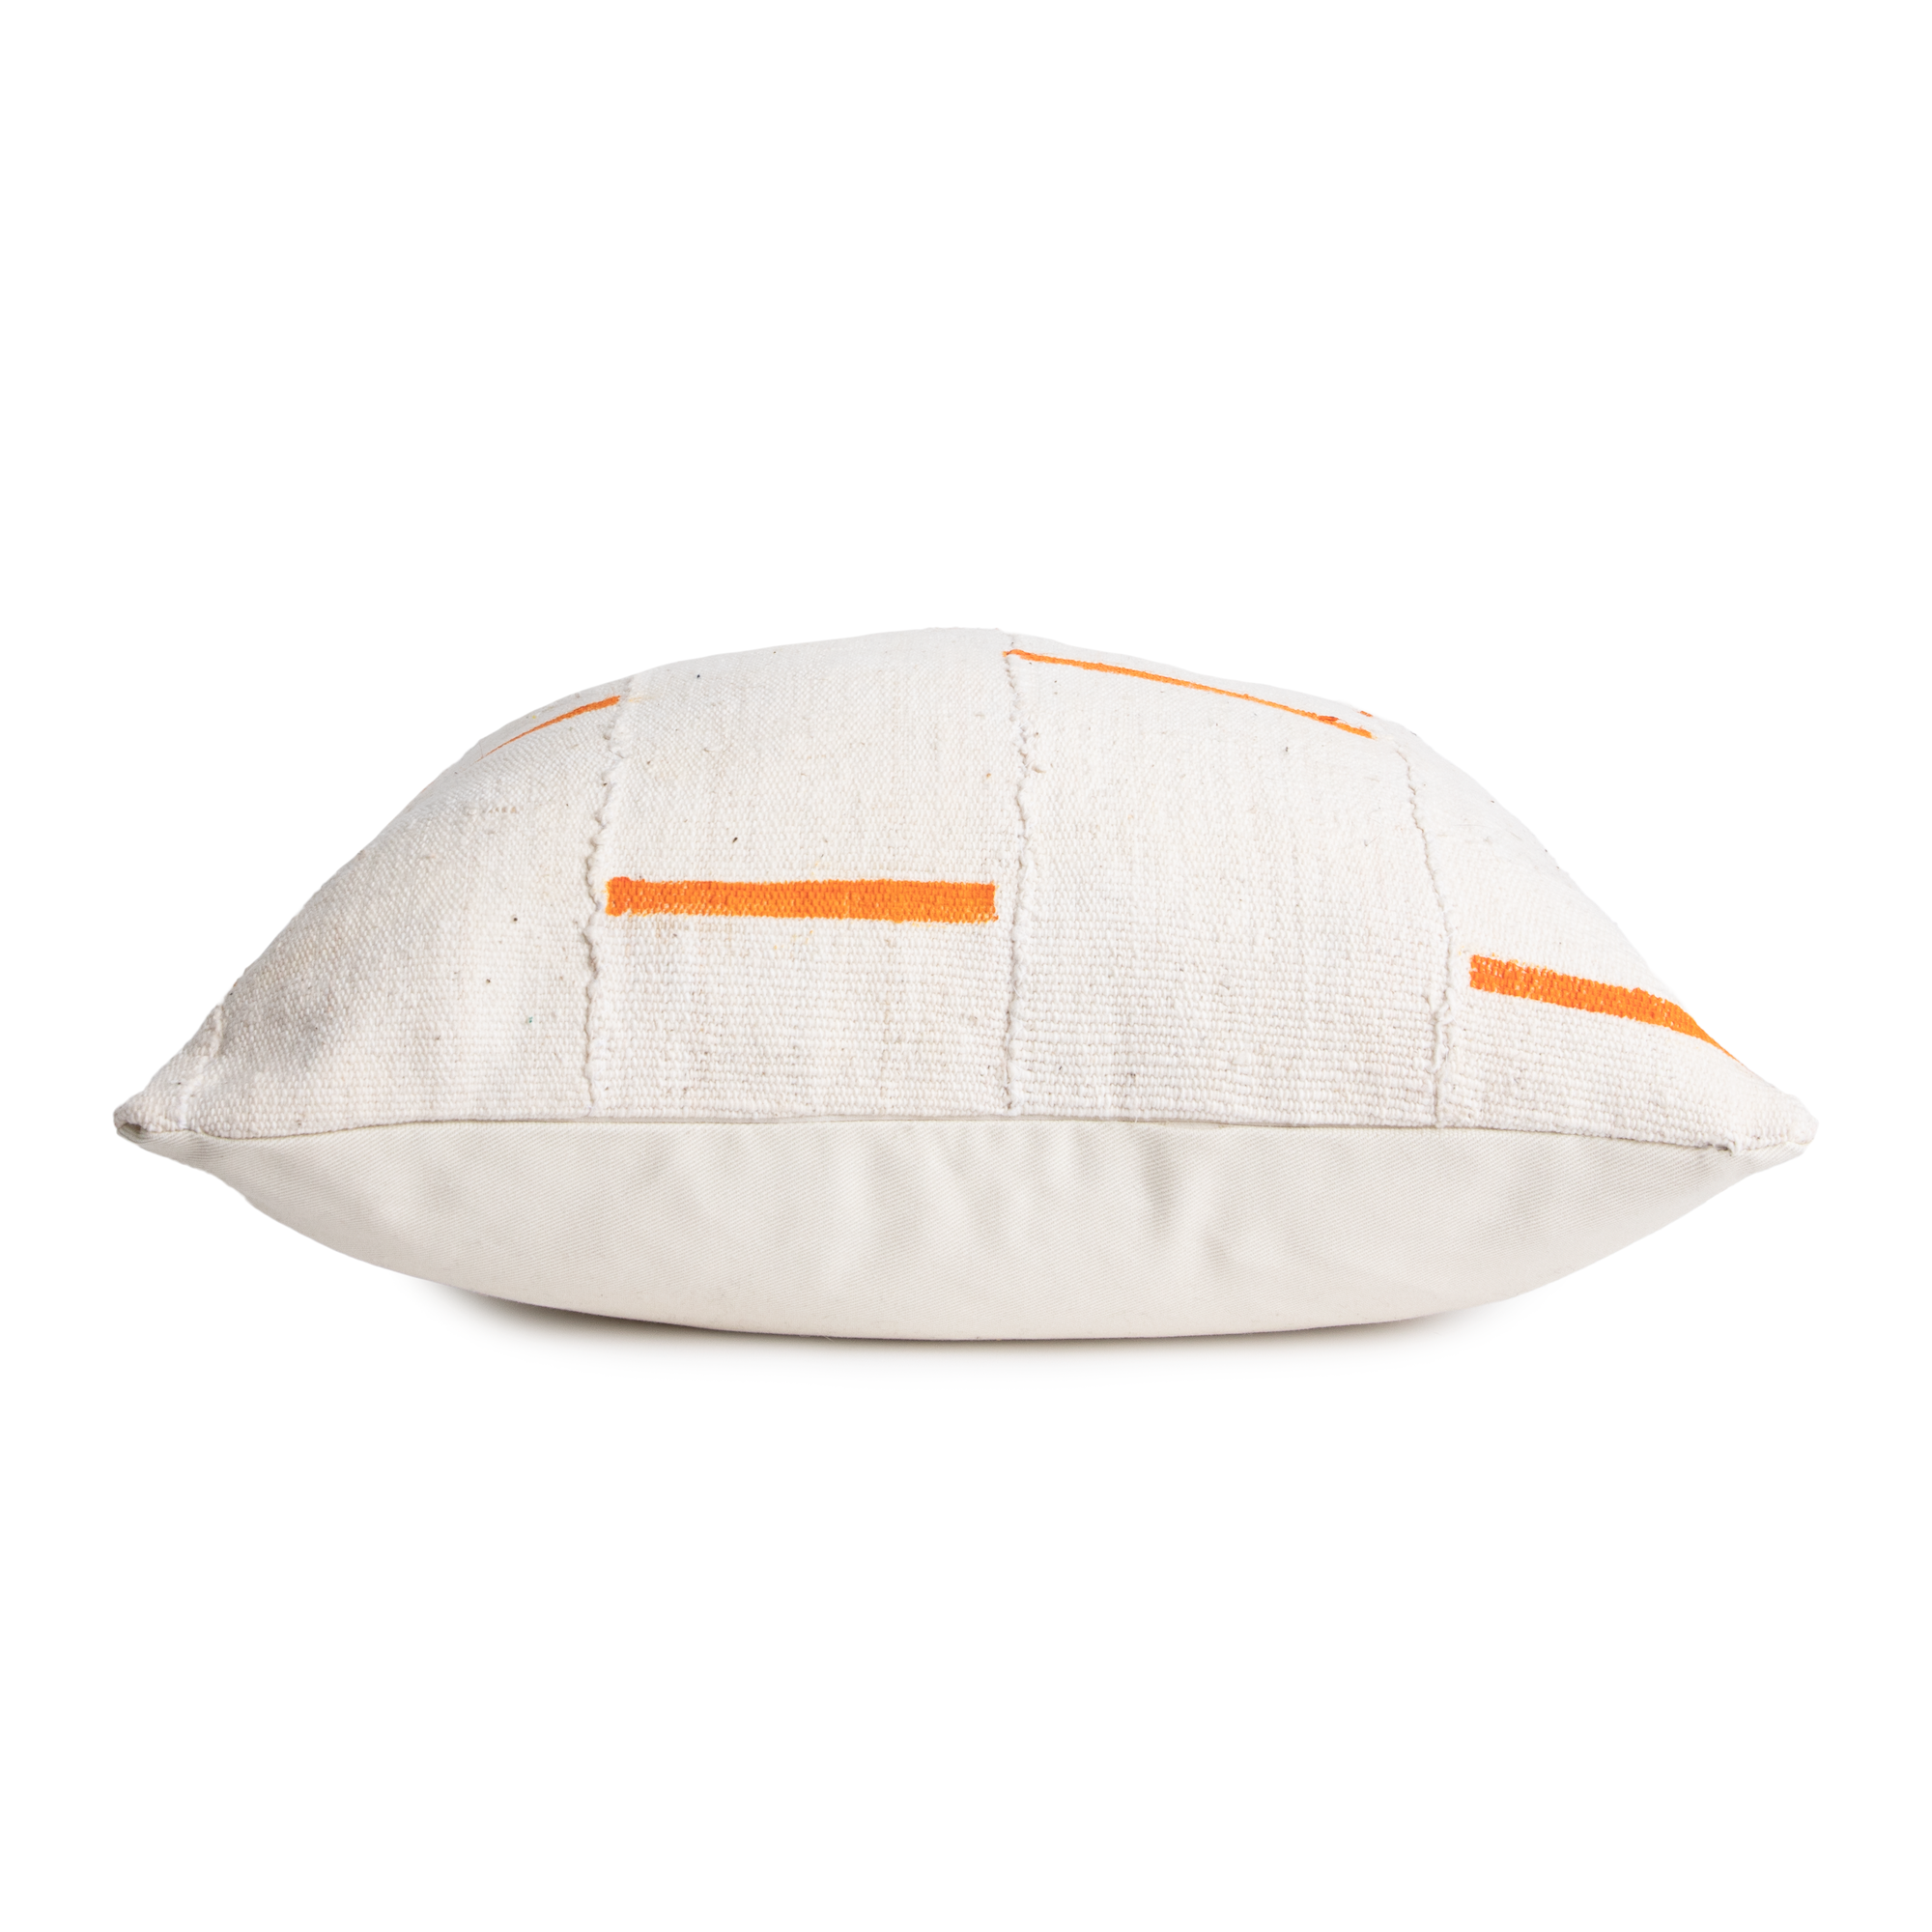 Orange and White Mud Cloth Pillow Cover | Dabney |